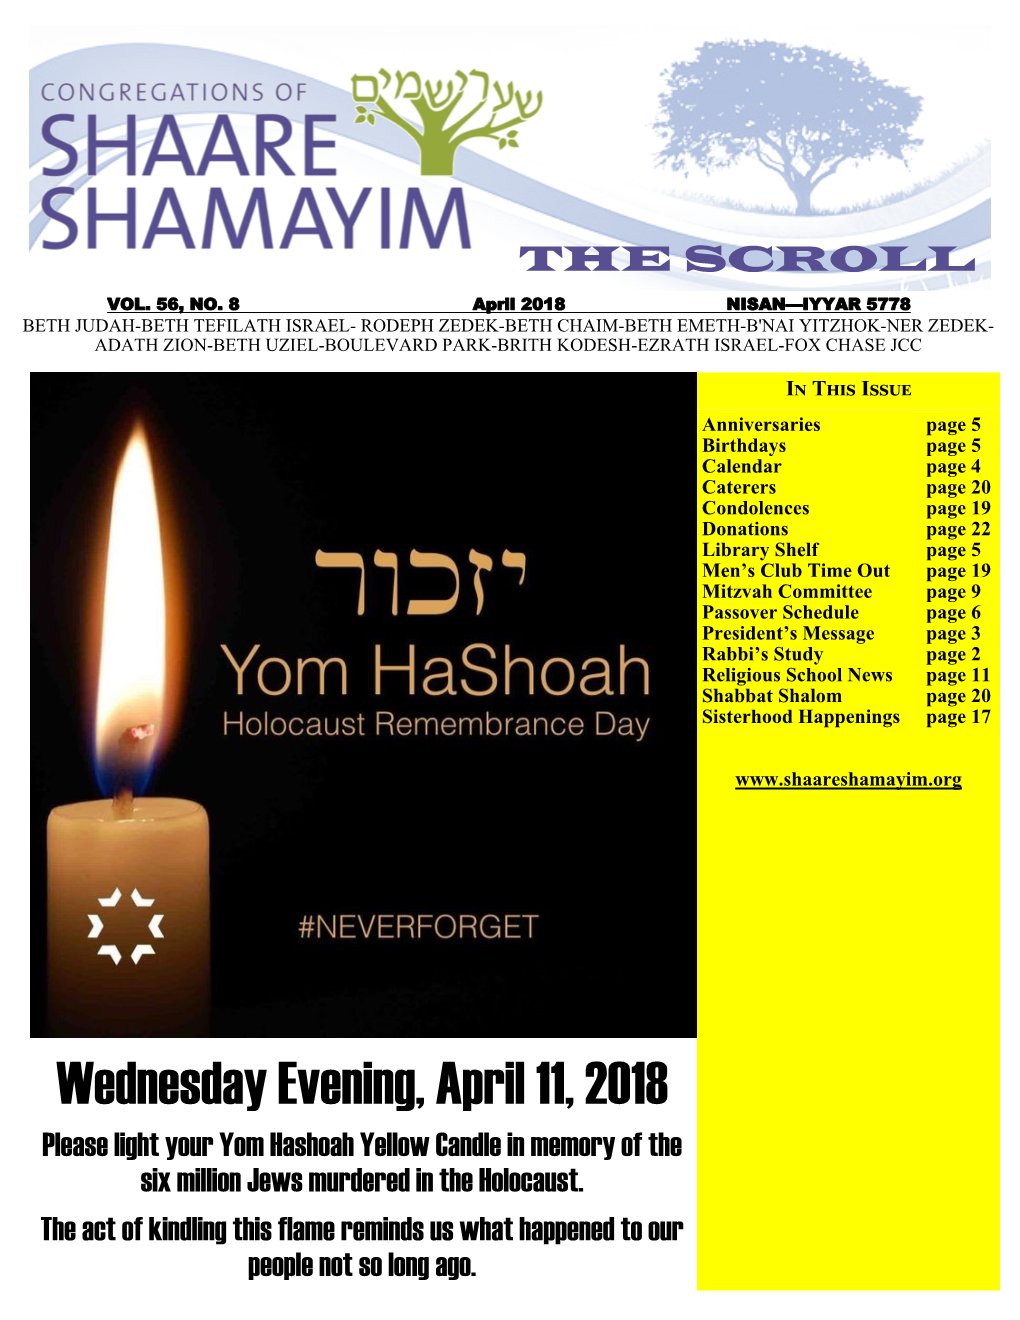 Wednesday Evening, April 11, 2018 Please Light Your Yom Hashoah Yellow Candle in Memory of the Six Million Jews Murdered in the Holocaust